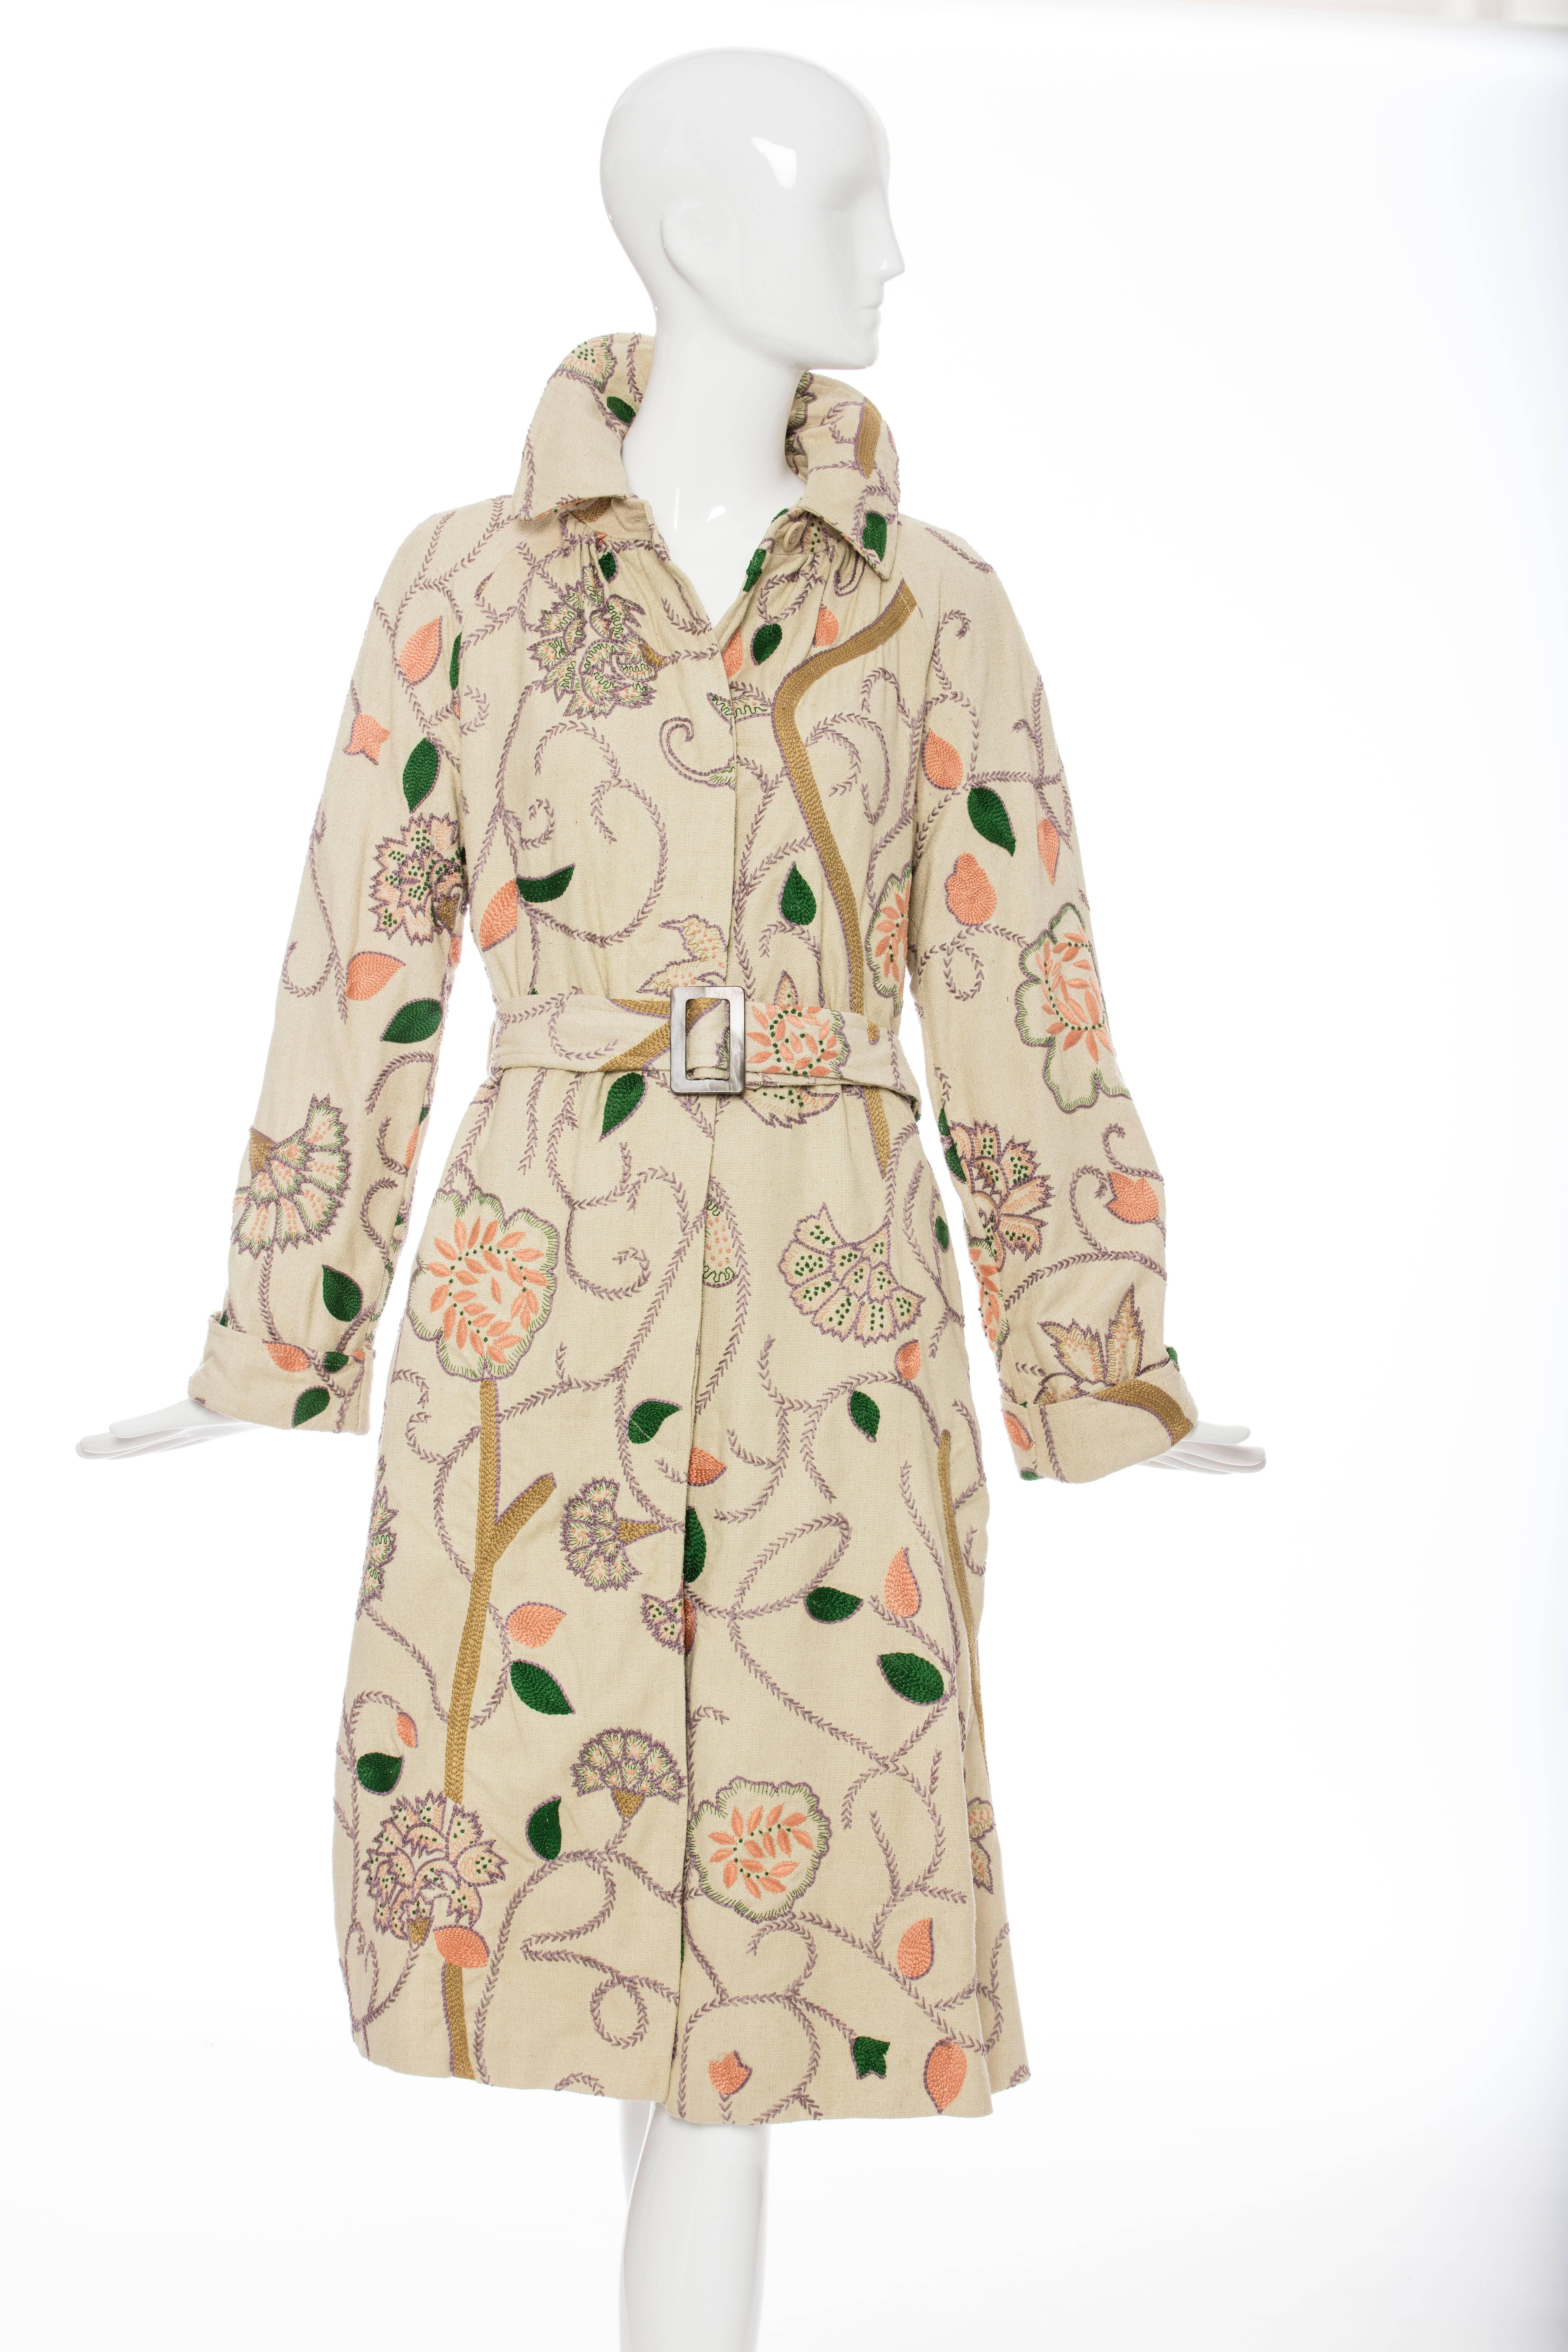 Dries Van Noten, Spring-Summer 2005 button front, cotton floral embroidered coat, dual seam pockets at sides, self belt and fully lined in silk.

Belgium: Small

Bust 36”, Waist 32”, Shoulder 15”, Length 41”, Sleeve 32”
Fabric Content: 100% Silk